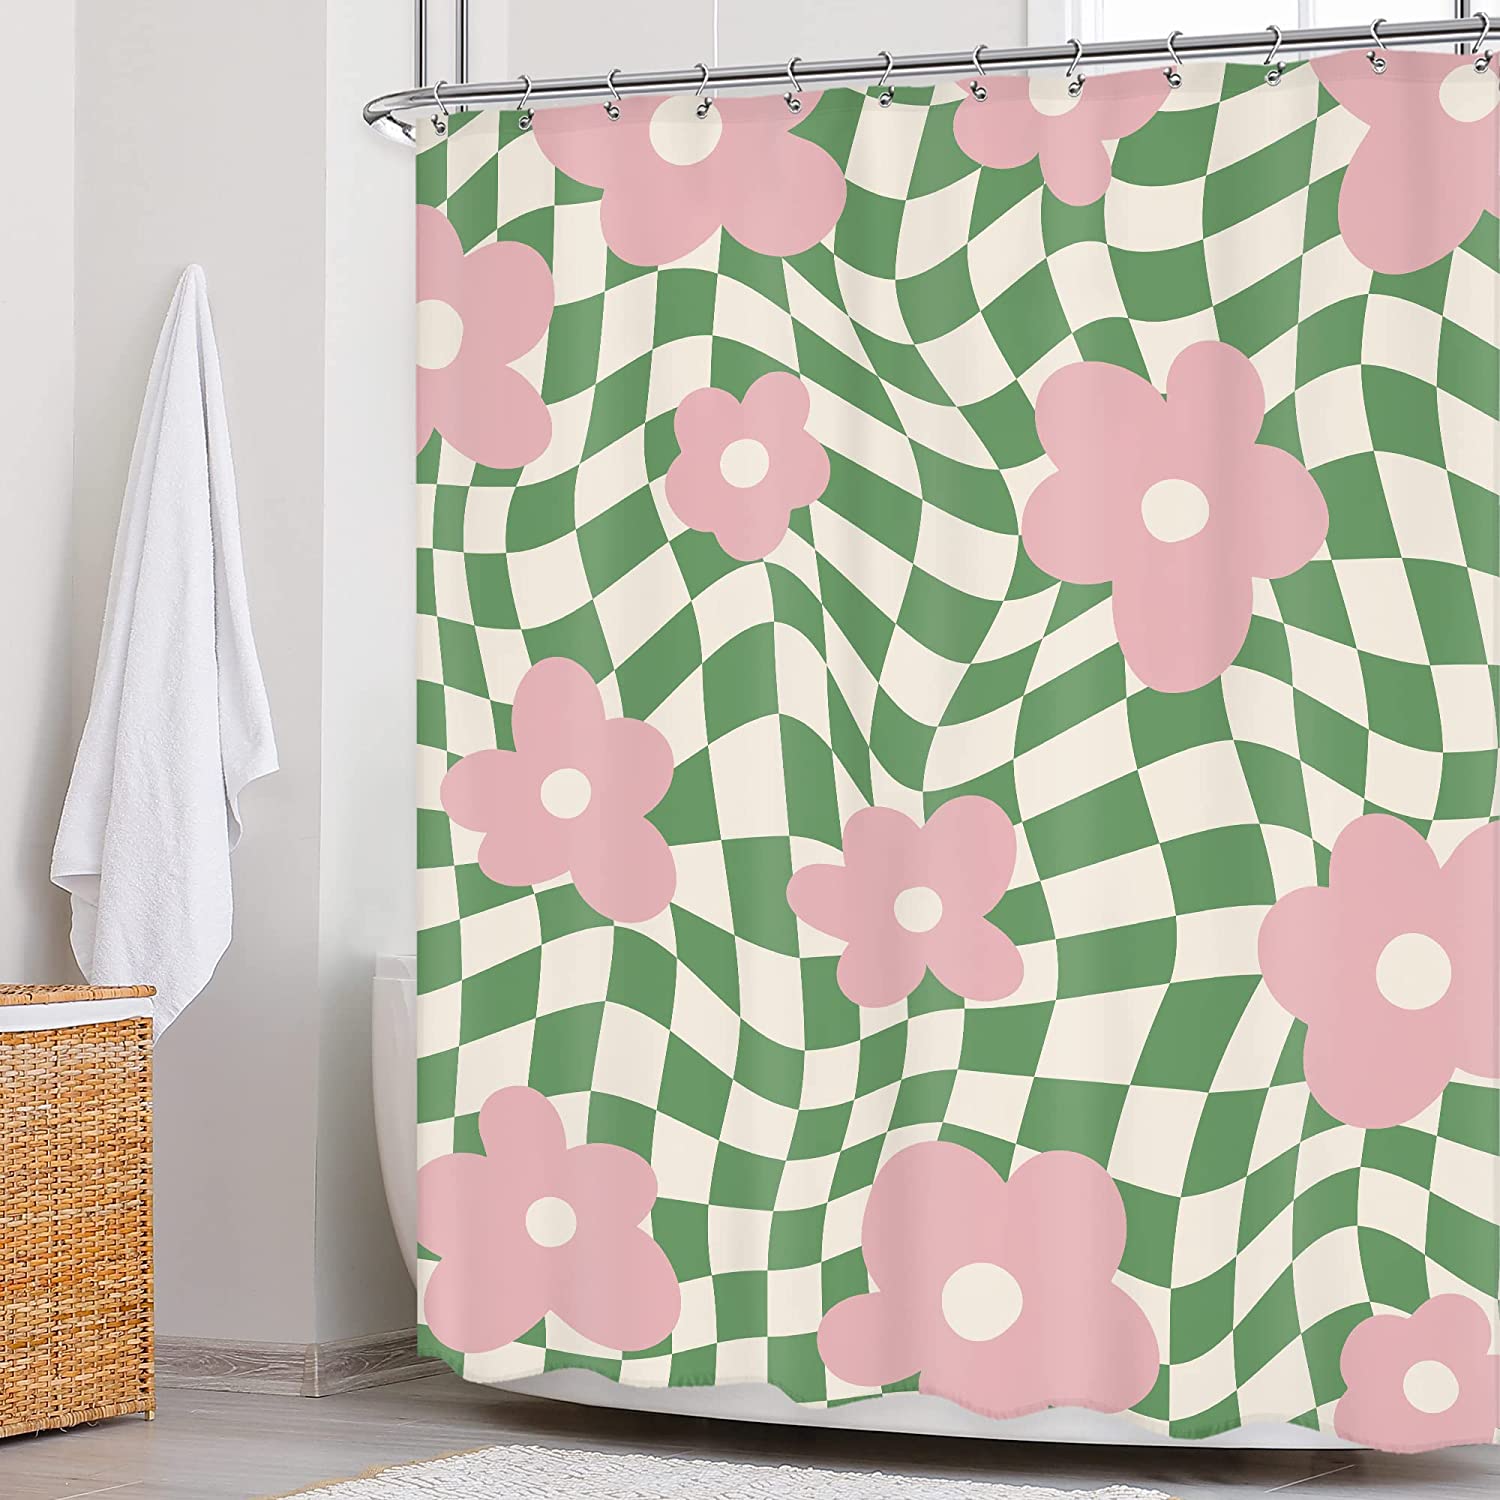 Newsely Retro Pink Green Trippy Shower Curtain 60Wx72H Inch Cute Flower Abstract Checkered Plaid Shower Curtain Bathroom Set Psychedelic Aesthetic Waterproof Bath Decoration Accessories Home Decor